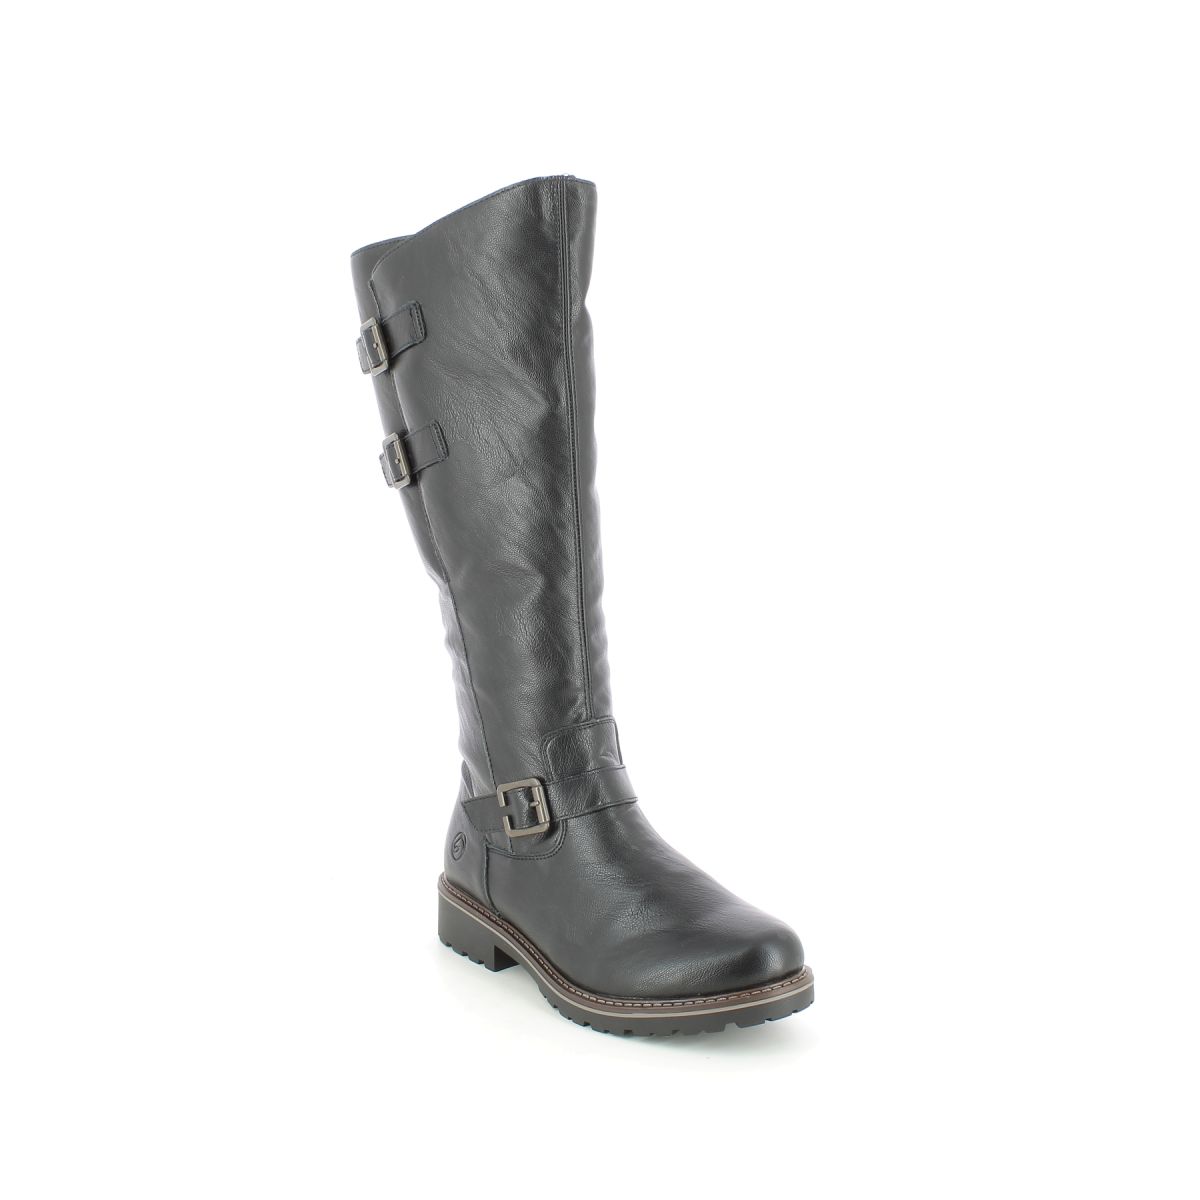 Remonte Indah Shearling Black Womens Knee-High Boots R6590-01 In Size 41 In Plain Black